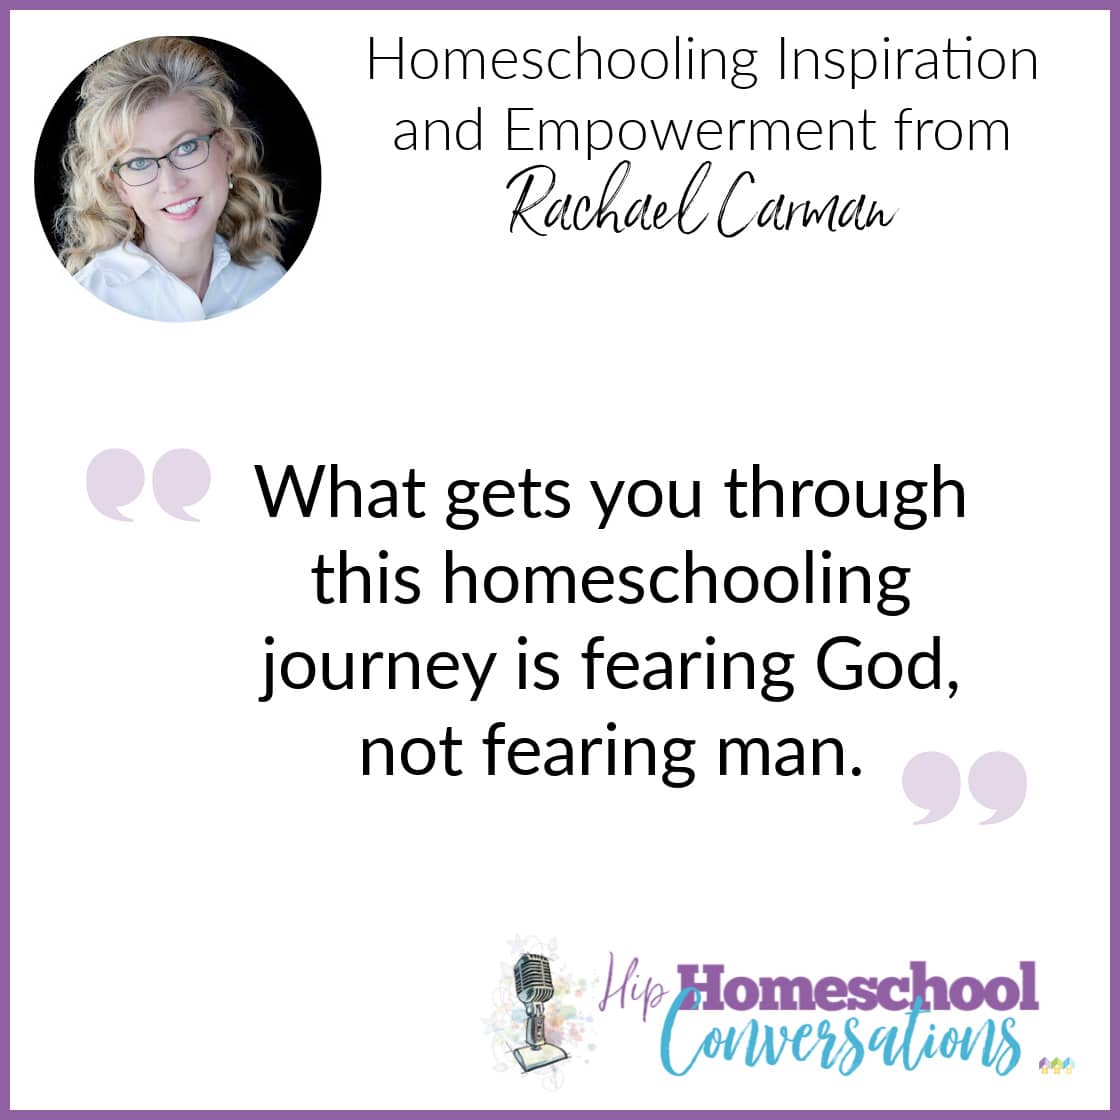 If you have ever felt inadequate to homeschool or just uninterested, join Trish as she interviews Rachael Carman. They discuss everything from butterflies to the Bible in a hilariously funny, truly sincere, and positively encouraging podcast to give Homeschooling Inspiration and Empowerment.